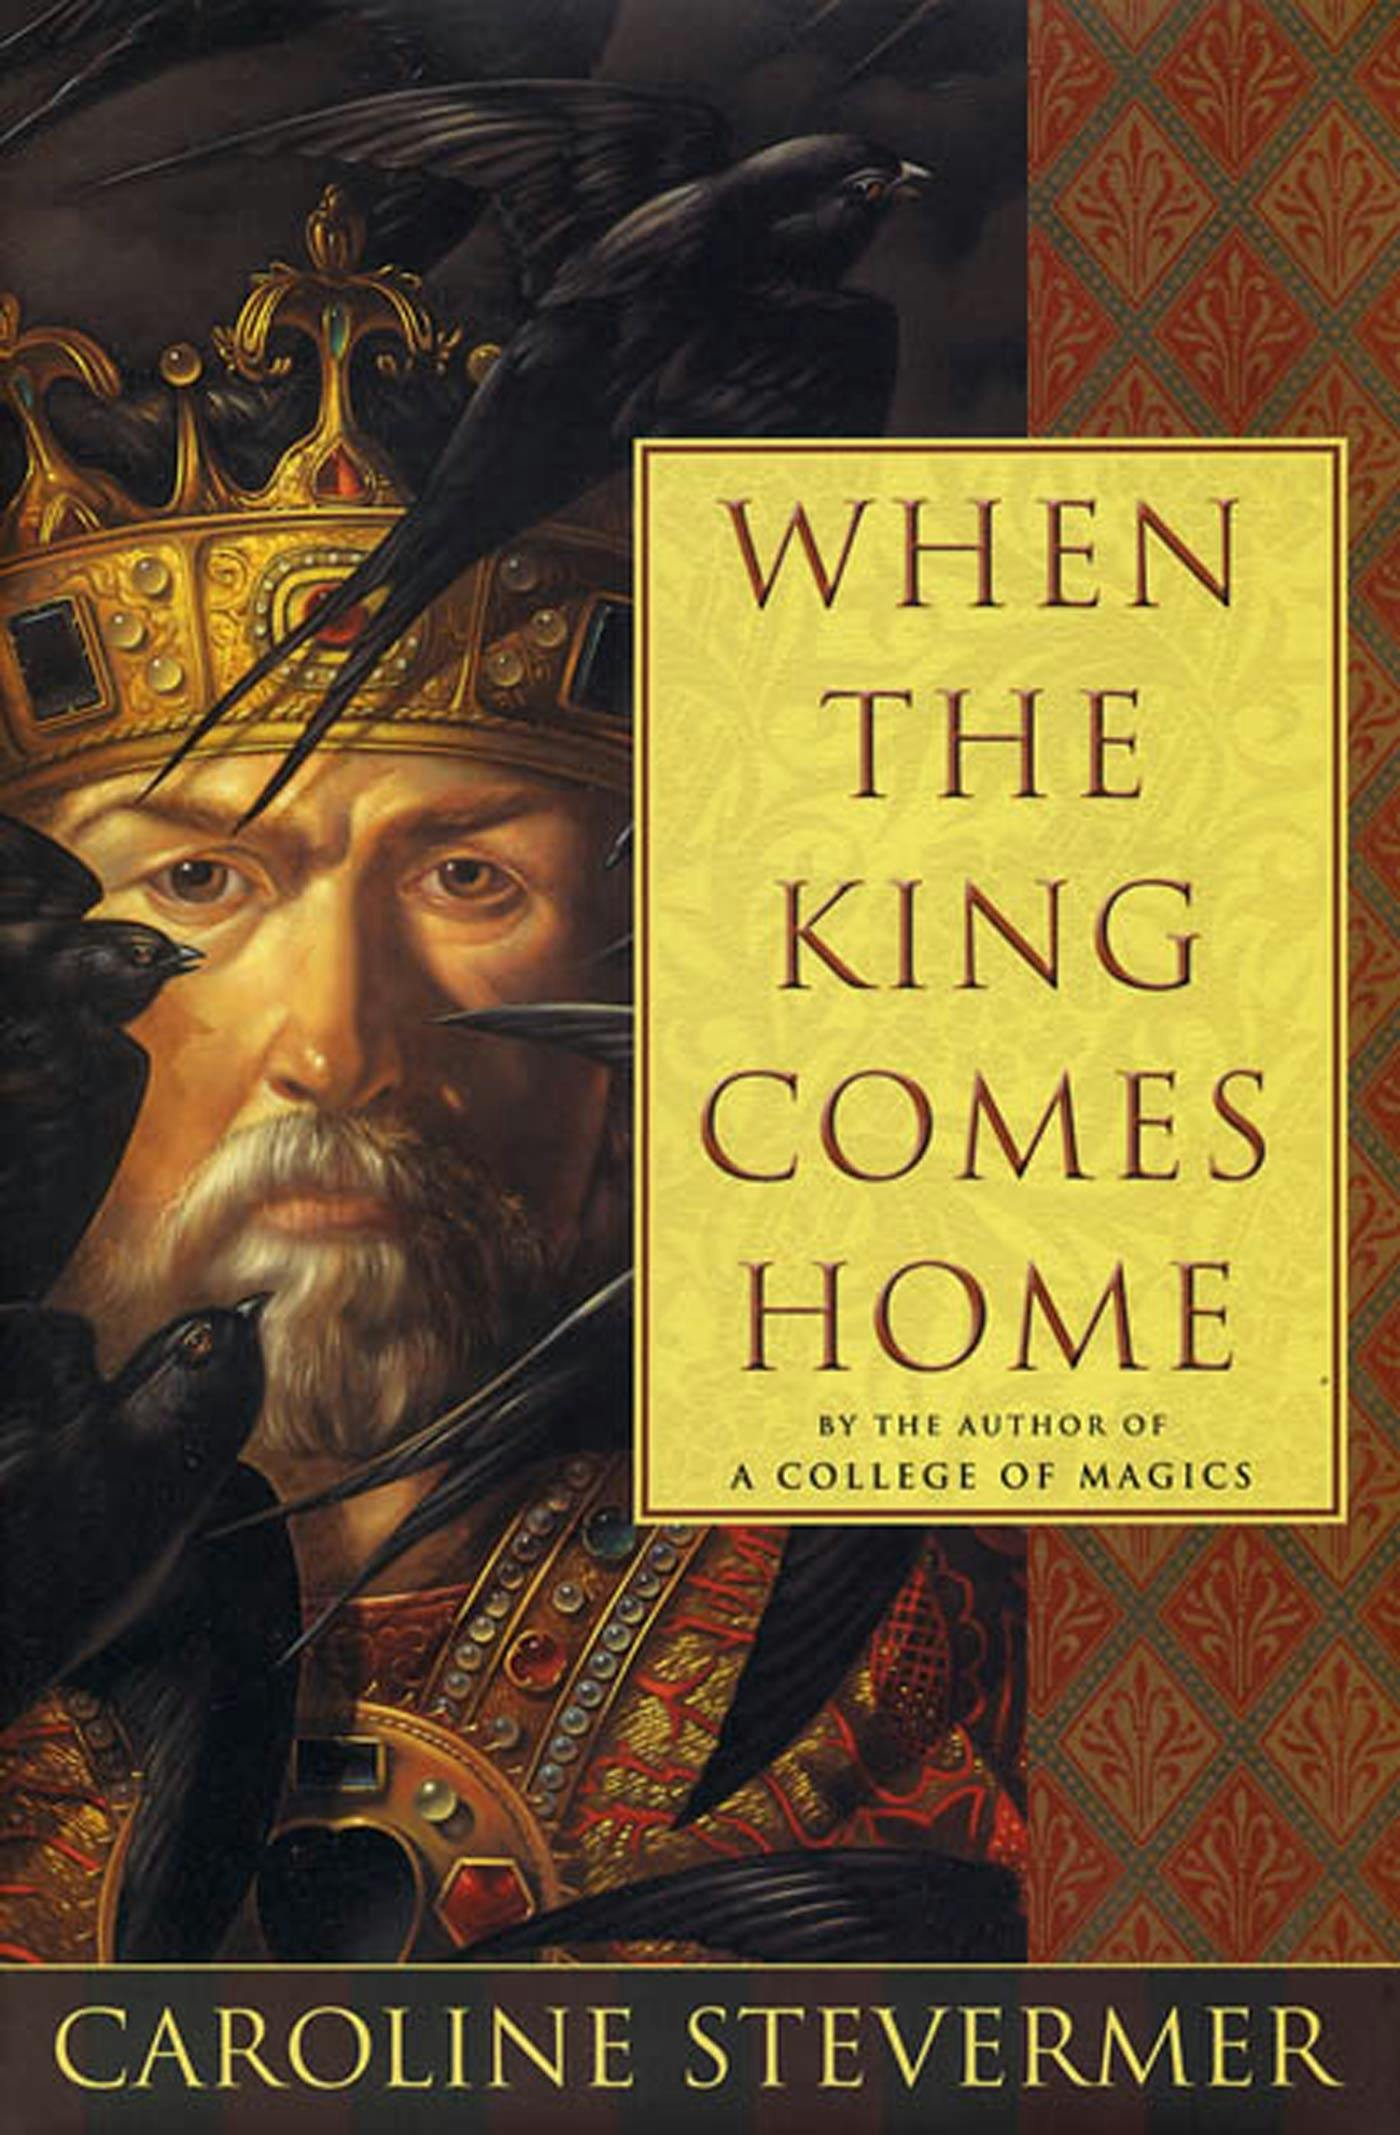 Cover for the book titled as: When The King Comes Home